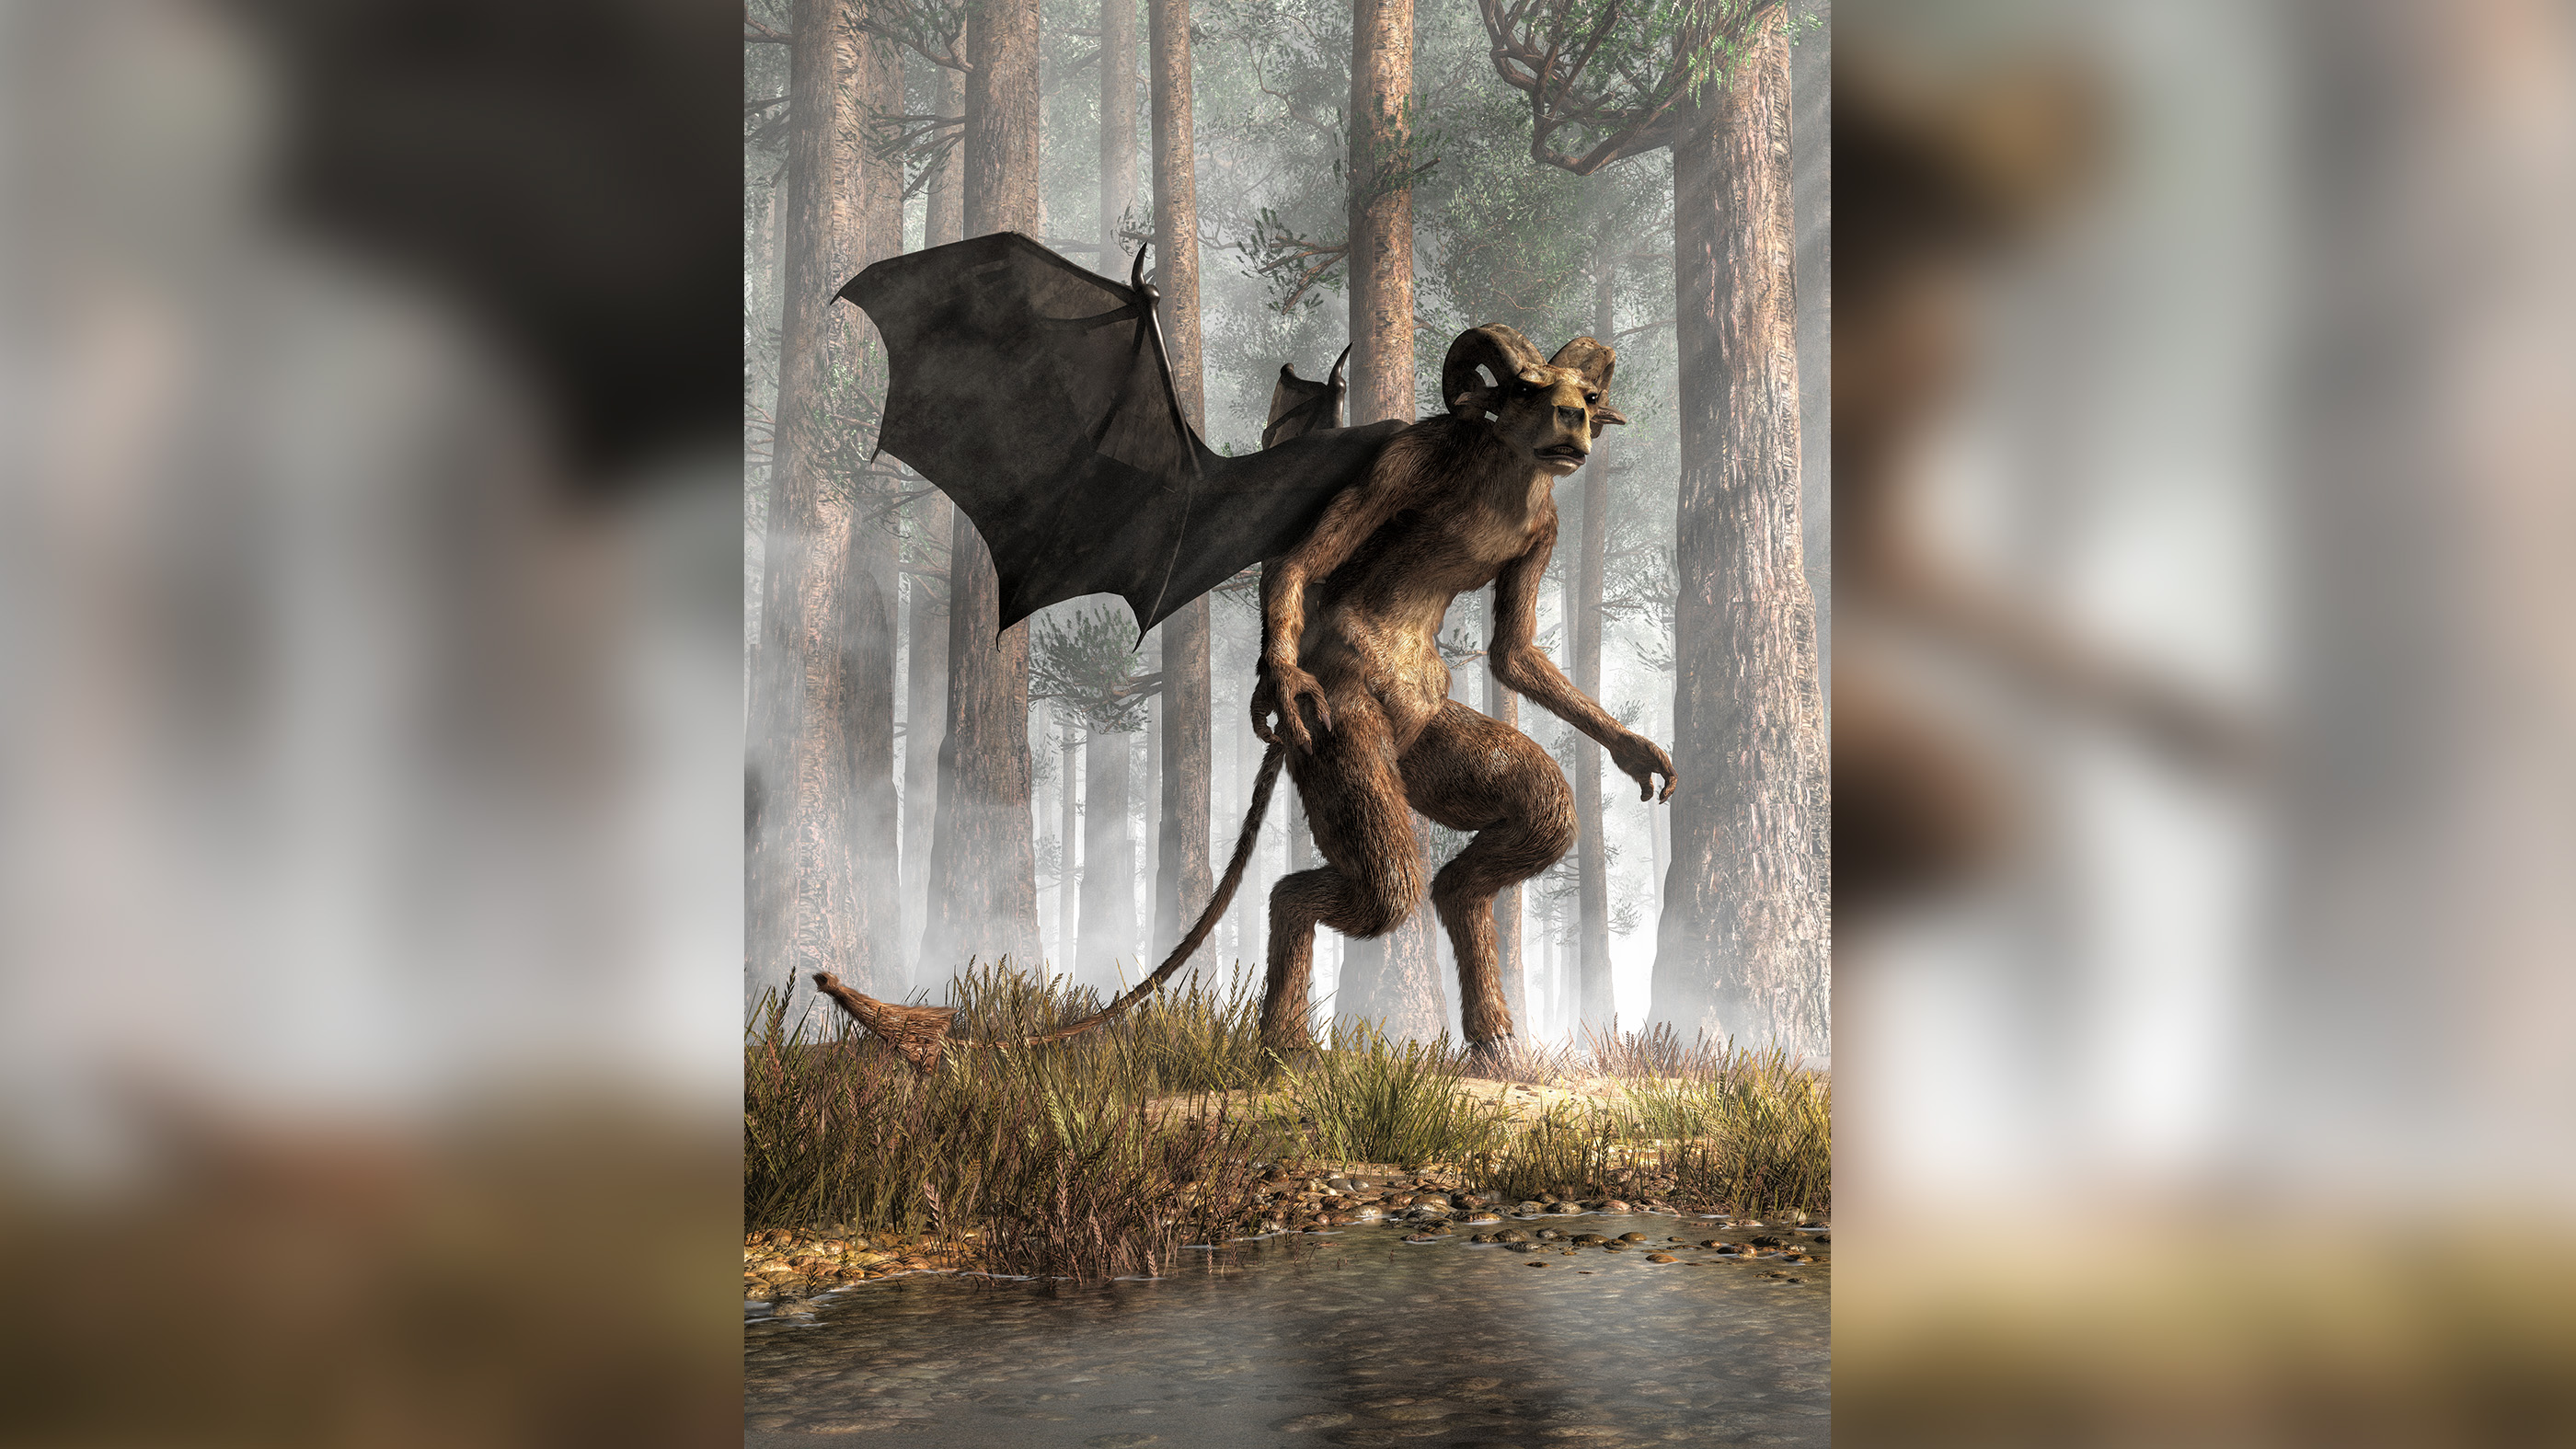 This 3D rendering shows what the mythical Jersey Devil supposedly looked like, with hoofed feet, horns and bat wings. The Jersey Devil is a legendary cryptid of southern New Jersey.